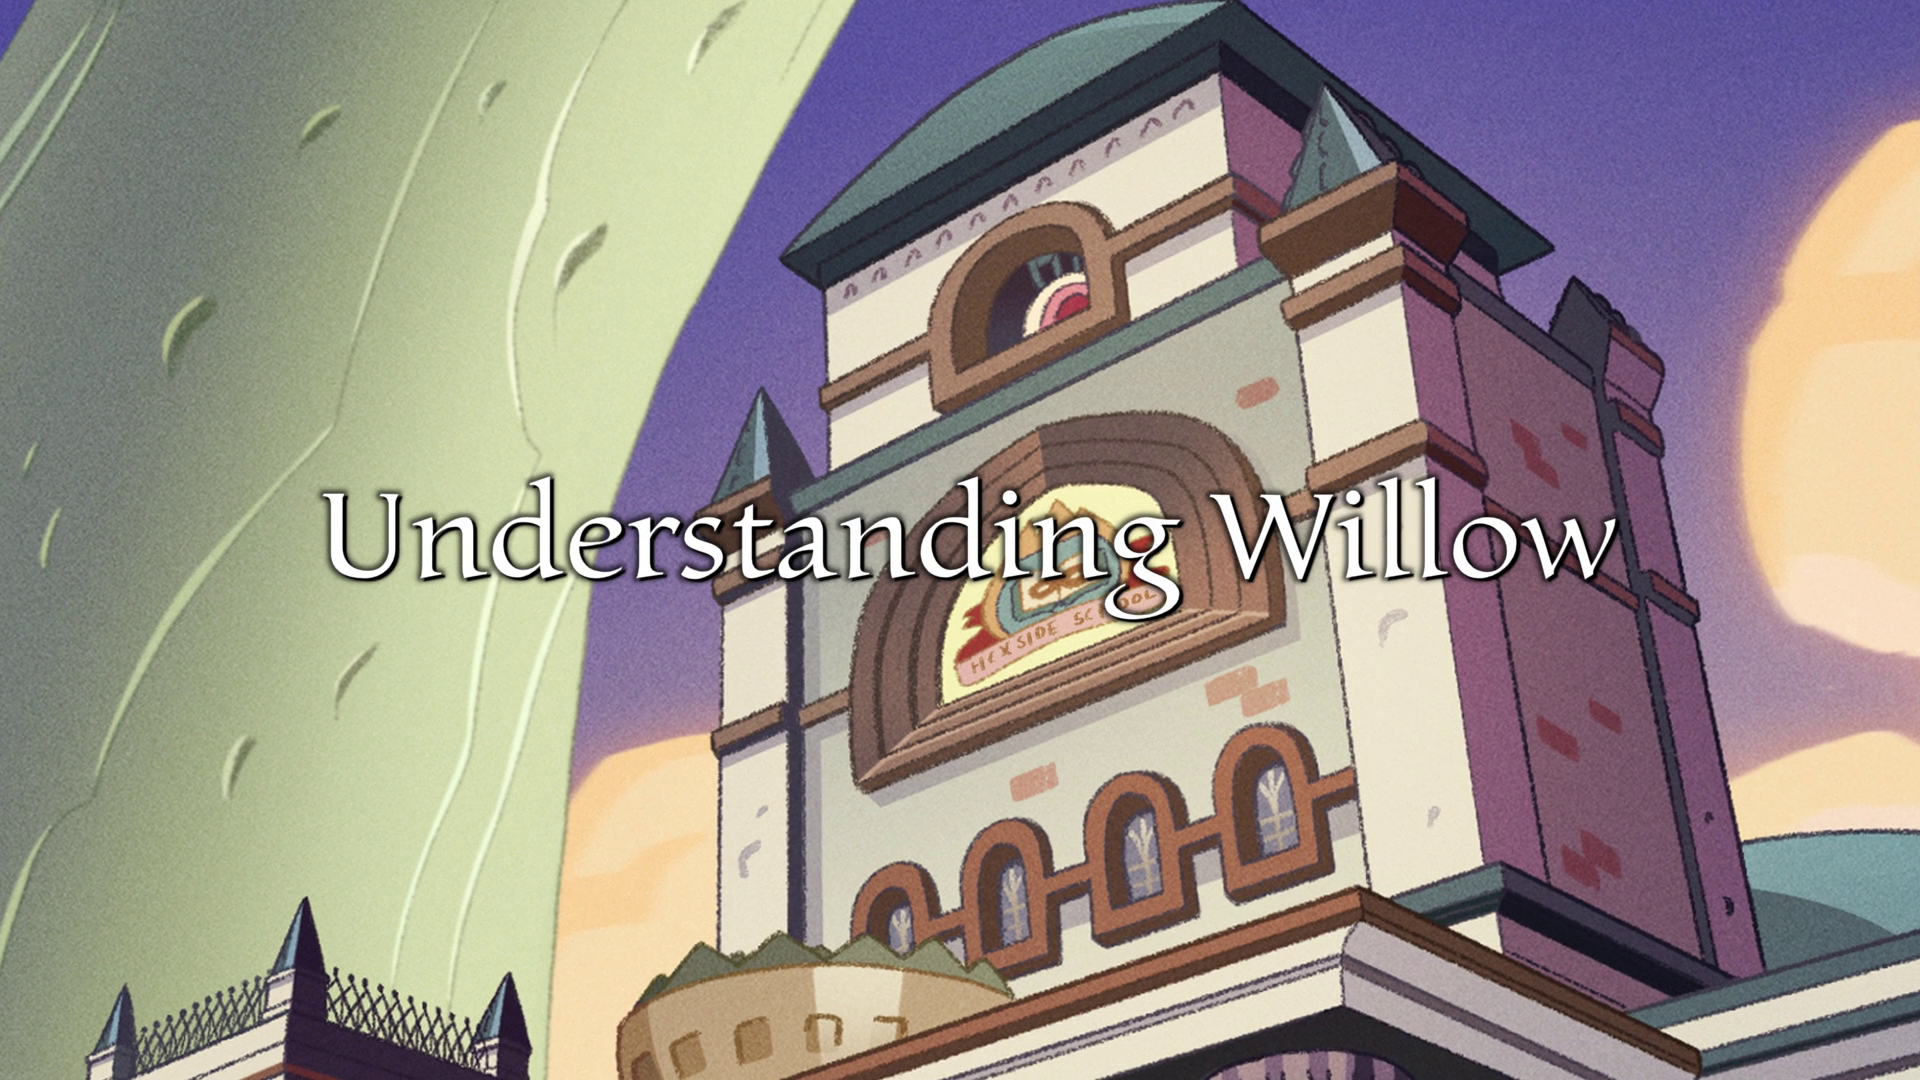 MC 'Toon Reviews: Understanding Willow - The Owl House Season 1 Episode 15  - ('Toon Reviews 42)